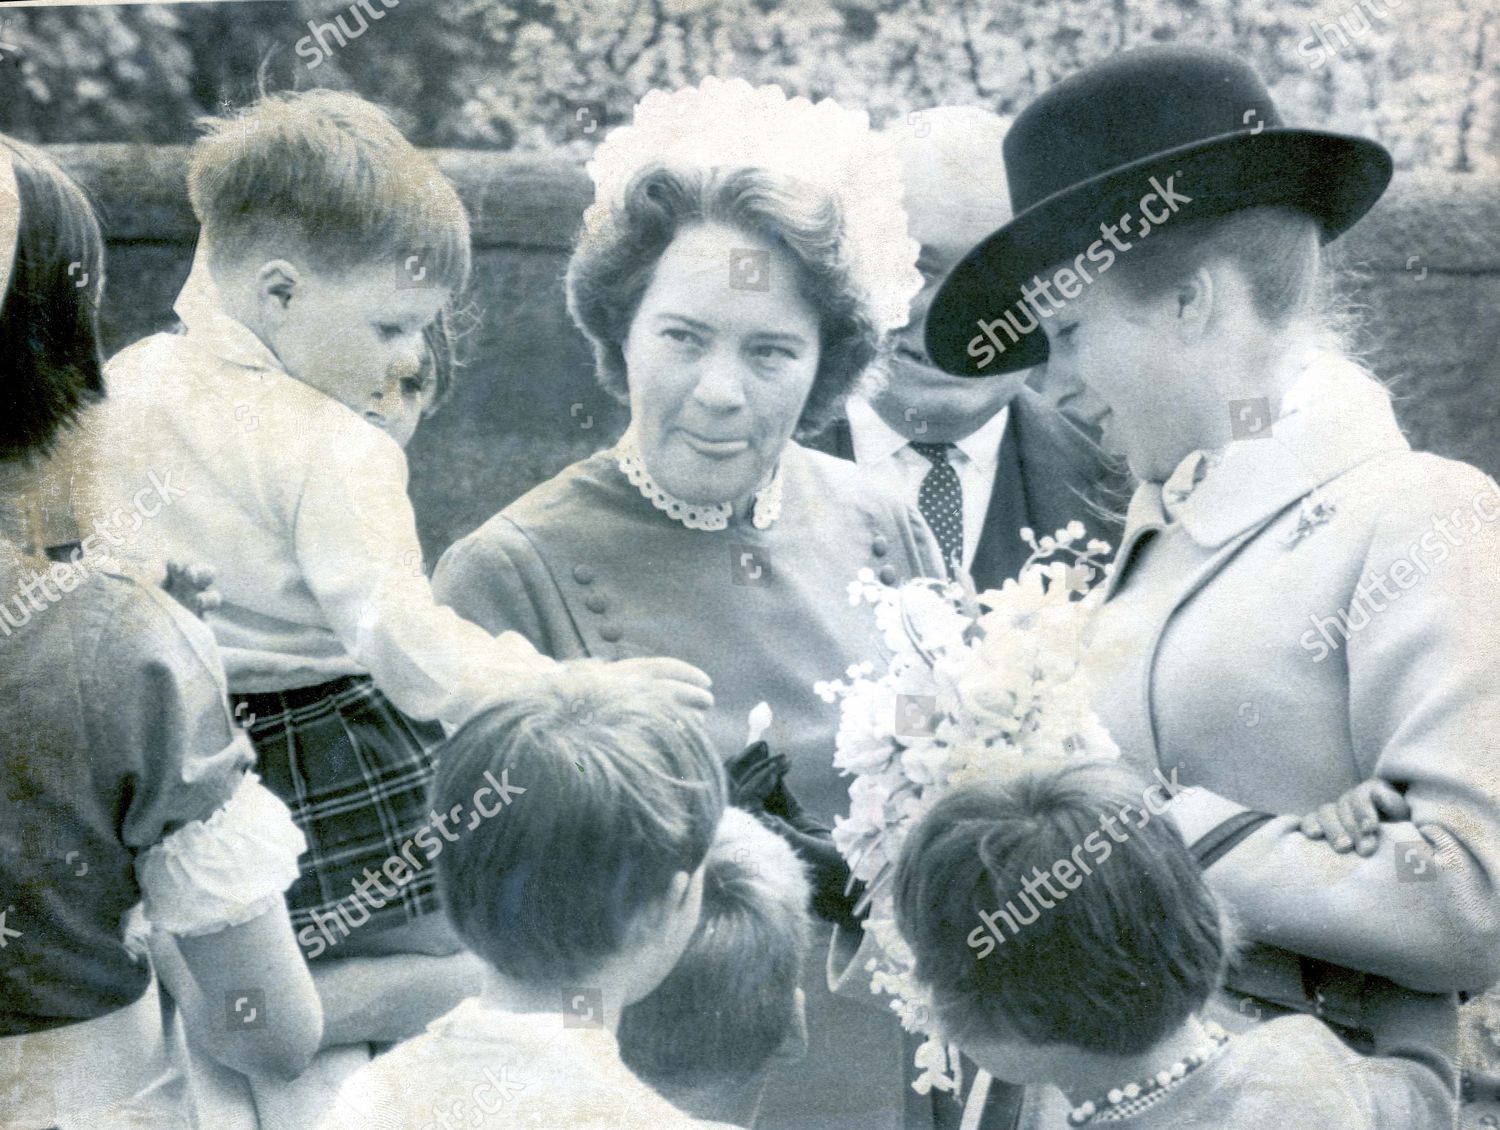 princess-anne-now-princess-royal-1969-picture-shows-princess-anne-wearing-a-large-cowboy-style-hat-during-her-visit-to-a-chidlrens-home-in-polwarth-terrace-edinburgh-the-princess-toured-the-house-and-gardens-and-children-clung-on-to-her-all-th-shutterstock-editorial-890815a.jpg